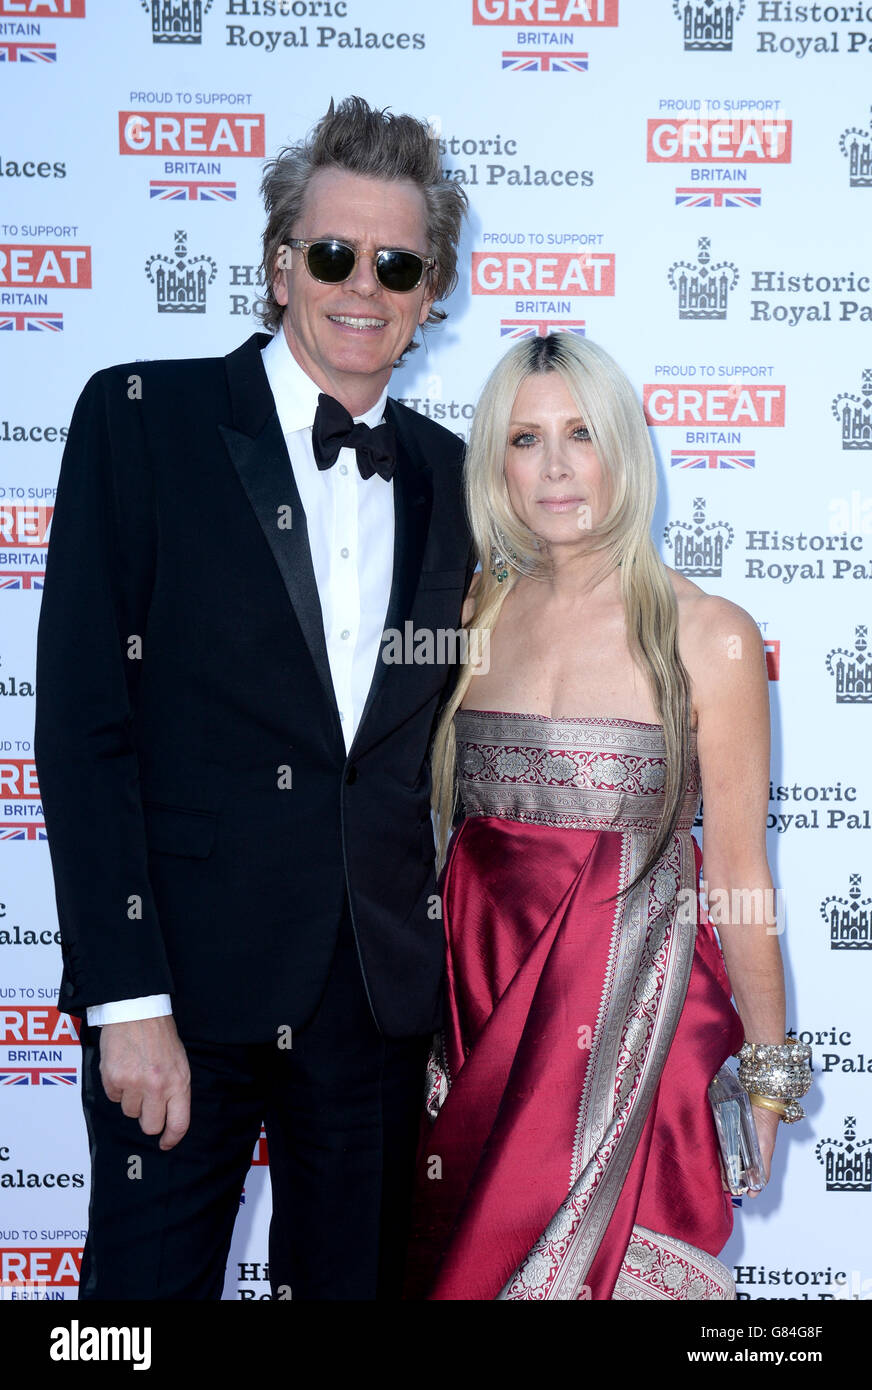 John Taylor and Gela Nash-Taylor attend the Kensington Palace Summer Gala to raise funds for the care of the Royal Ceremonial Dress Collection, London. Stock Photo